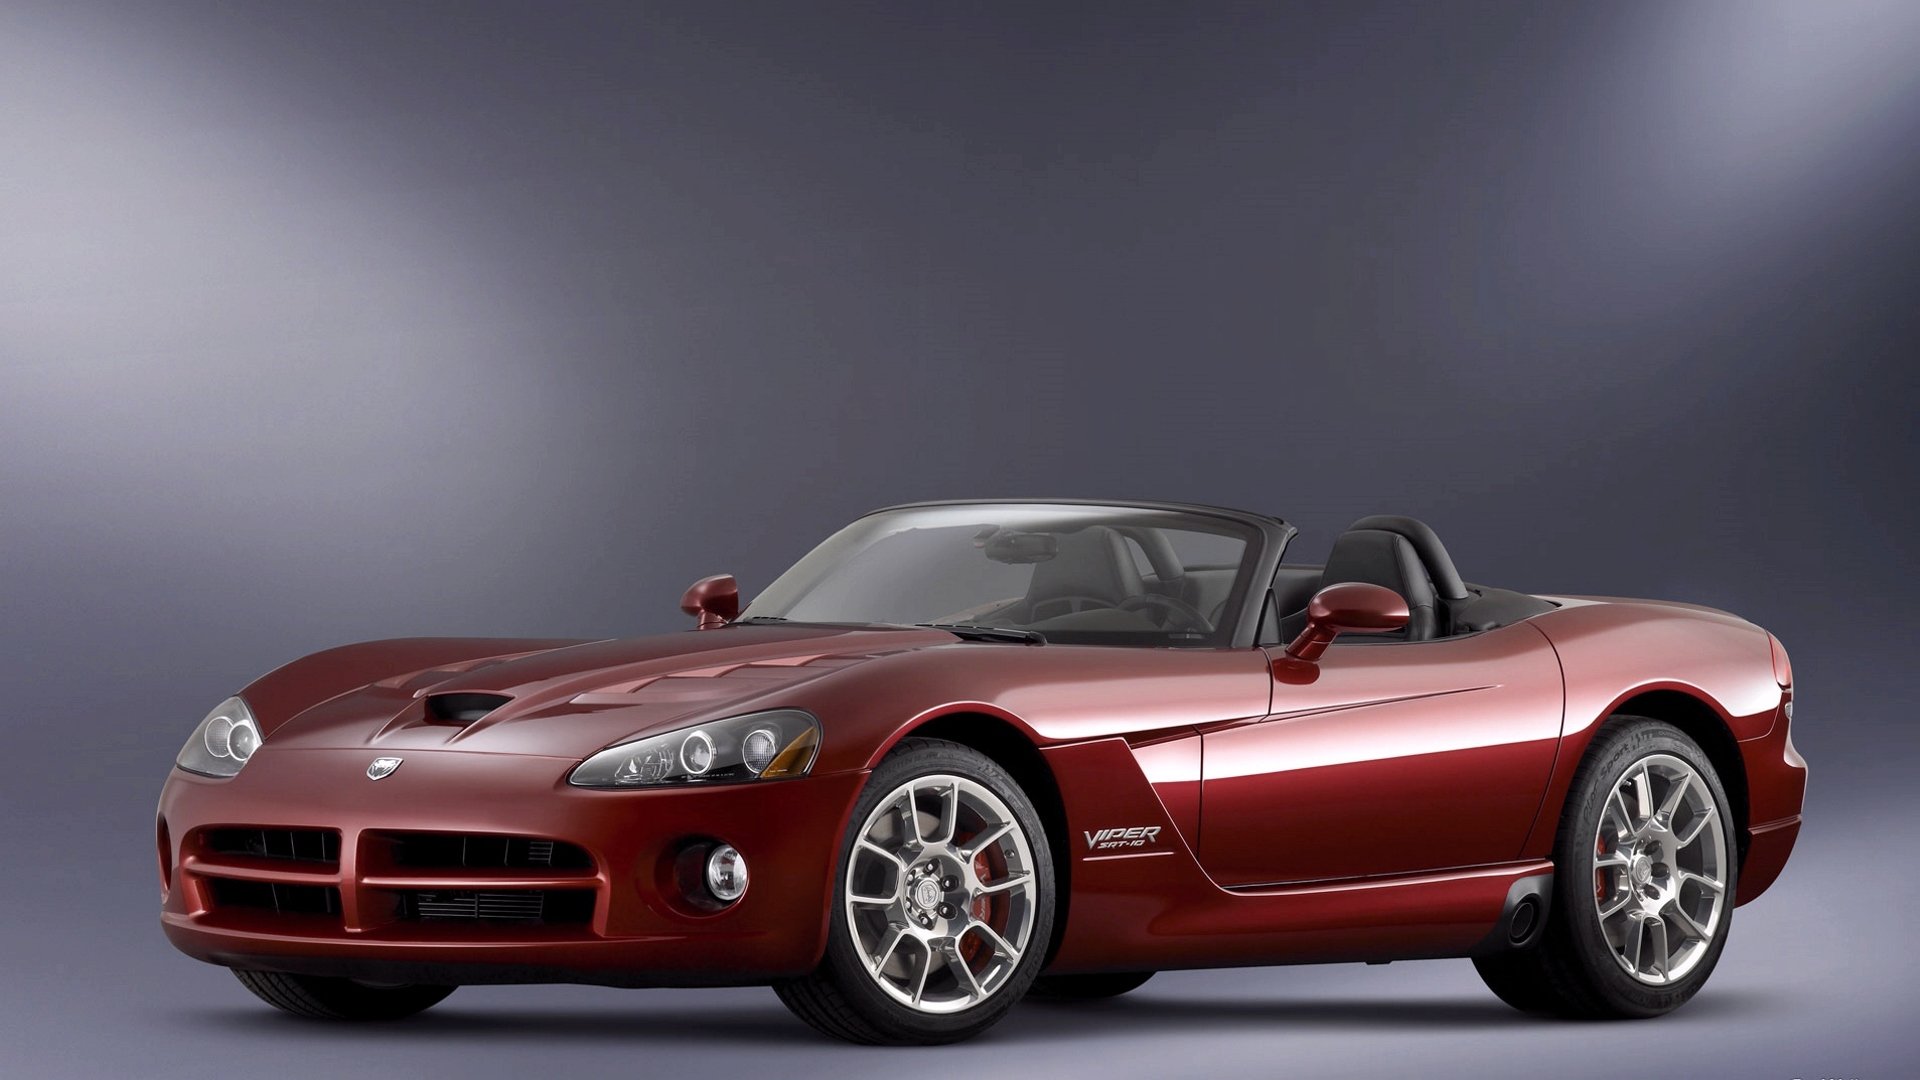 Best Dodge Viper background ID:8347 for High Resolution hd 1920x1080 computer